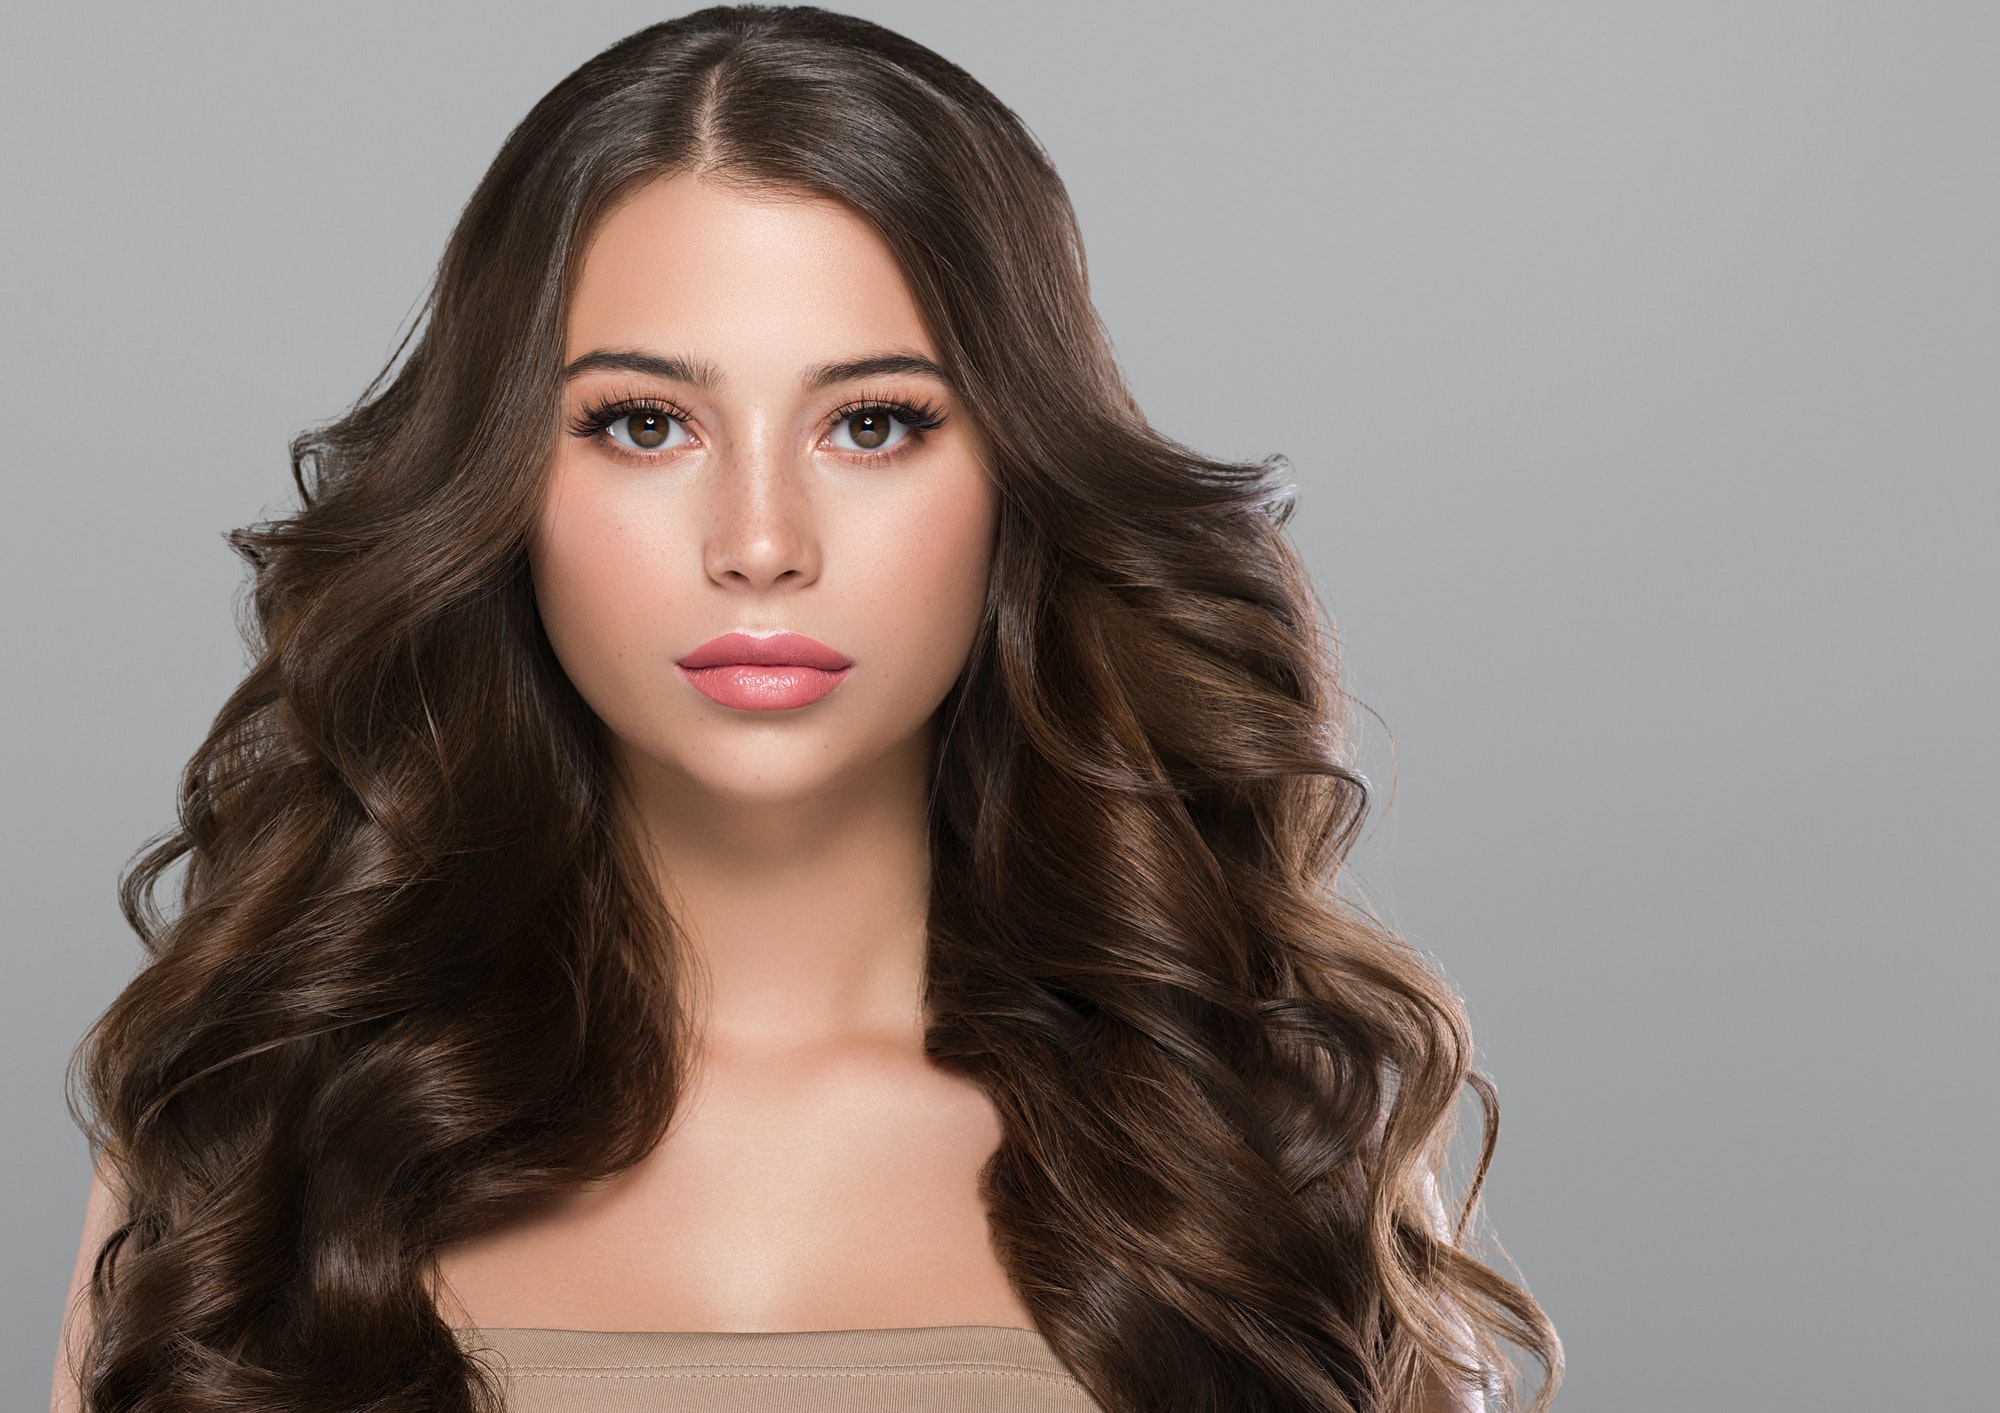 Digital Perm Guide: Everything to Know About Getting a Digital Perm